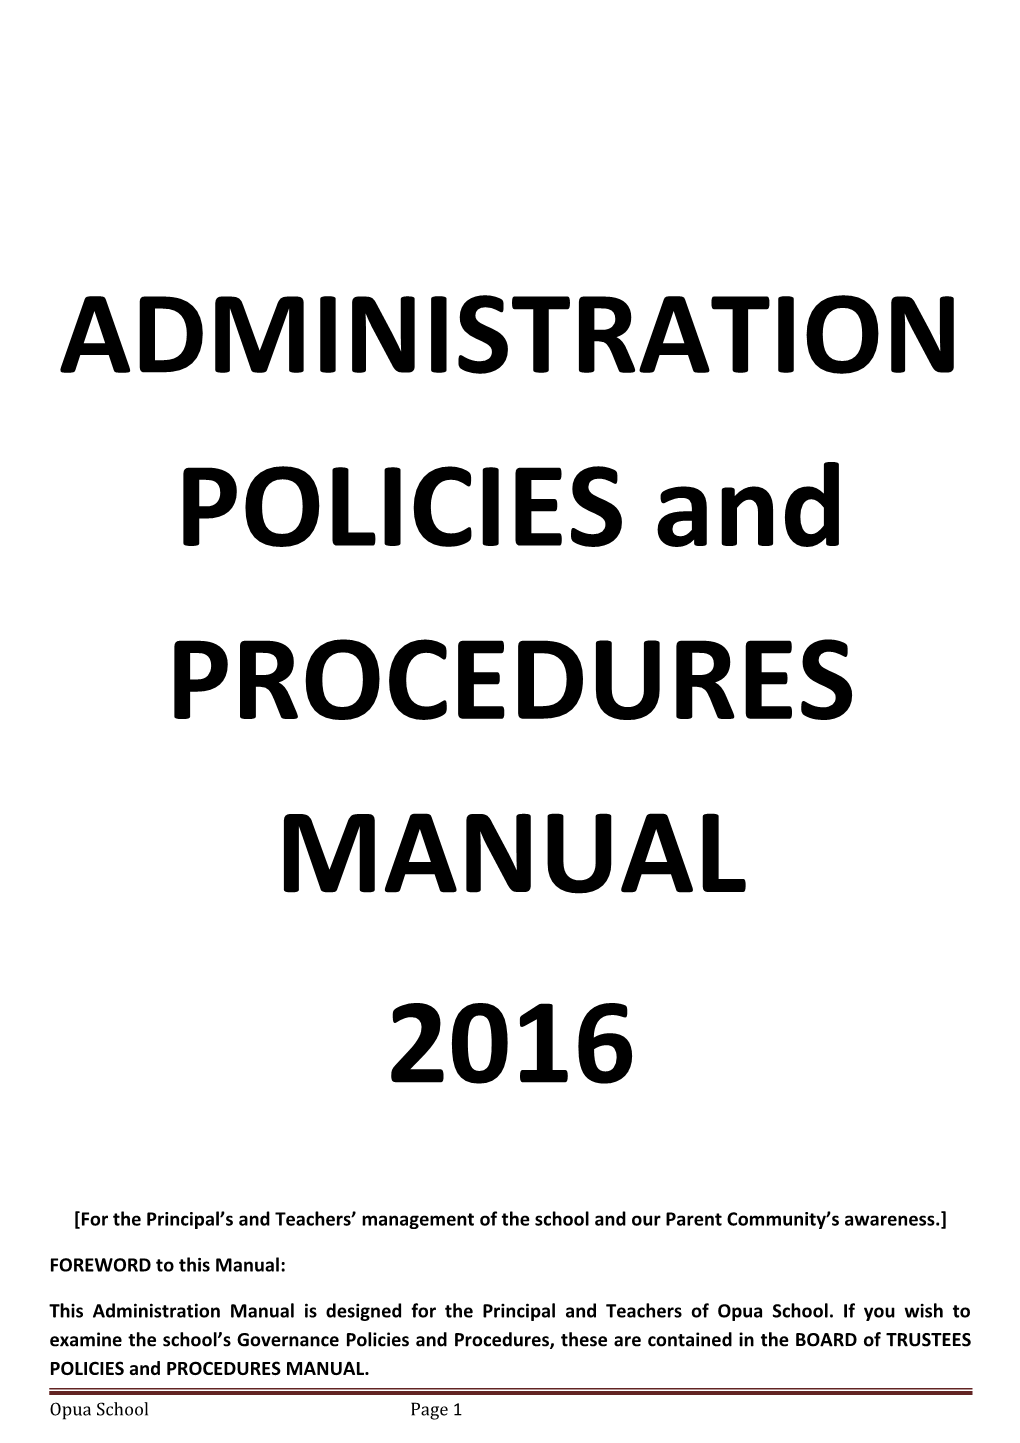 ADMINISTRATION POLICIES and PROCEDURES MANUAL s1